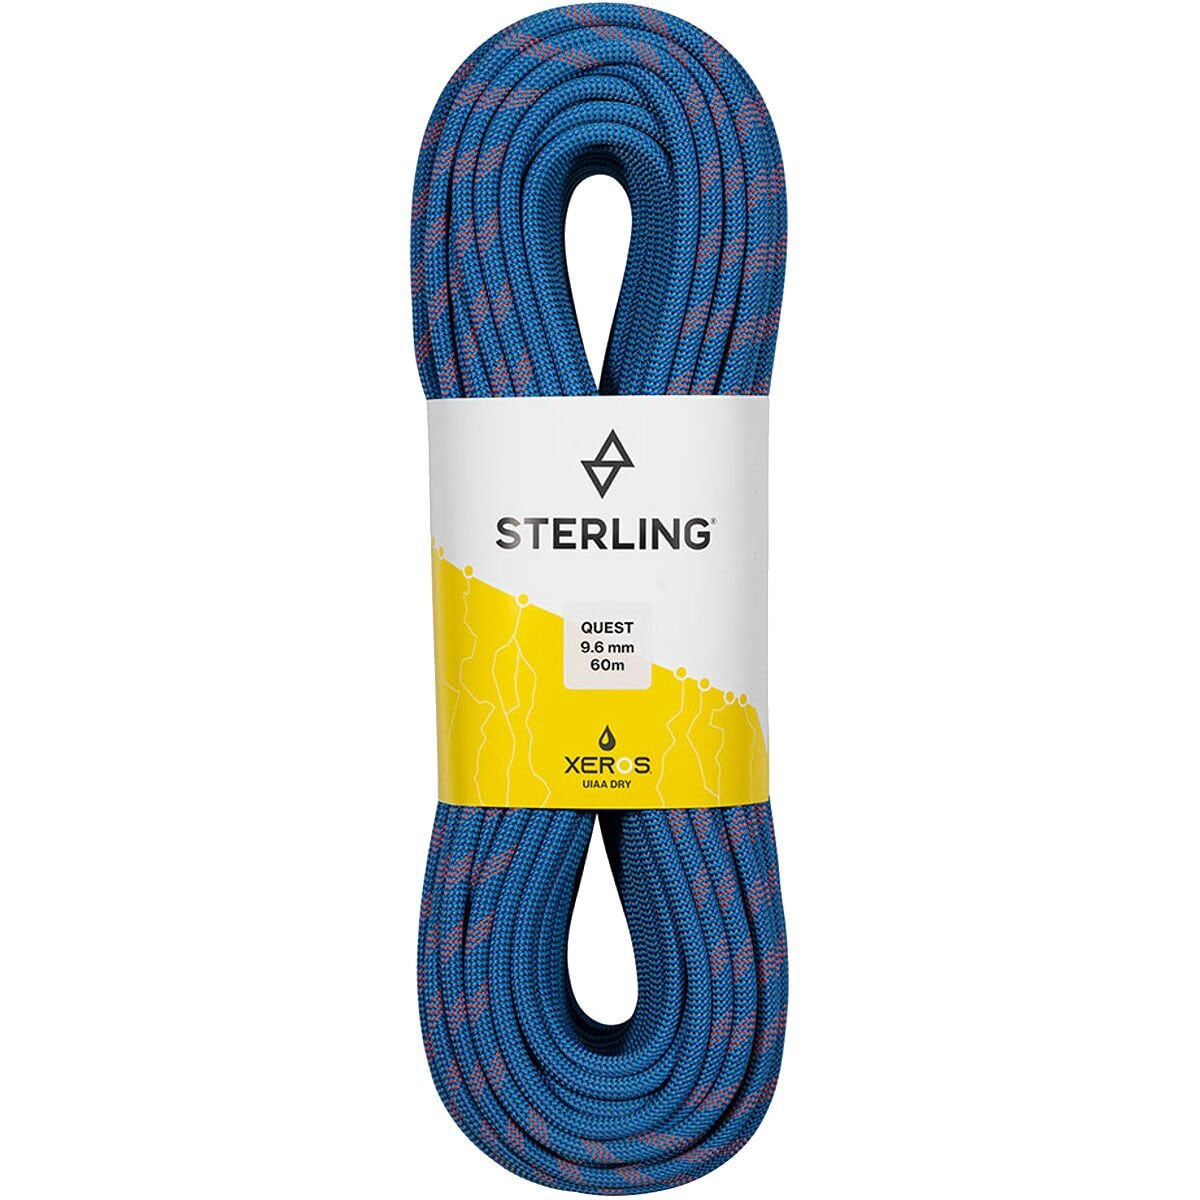 Sterling Quest 9.6 BiColor XEROS Rope